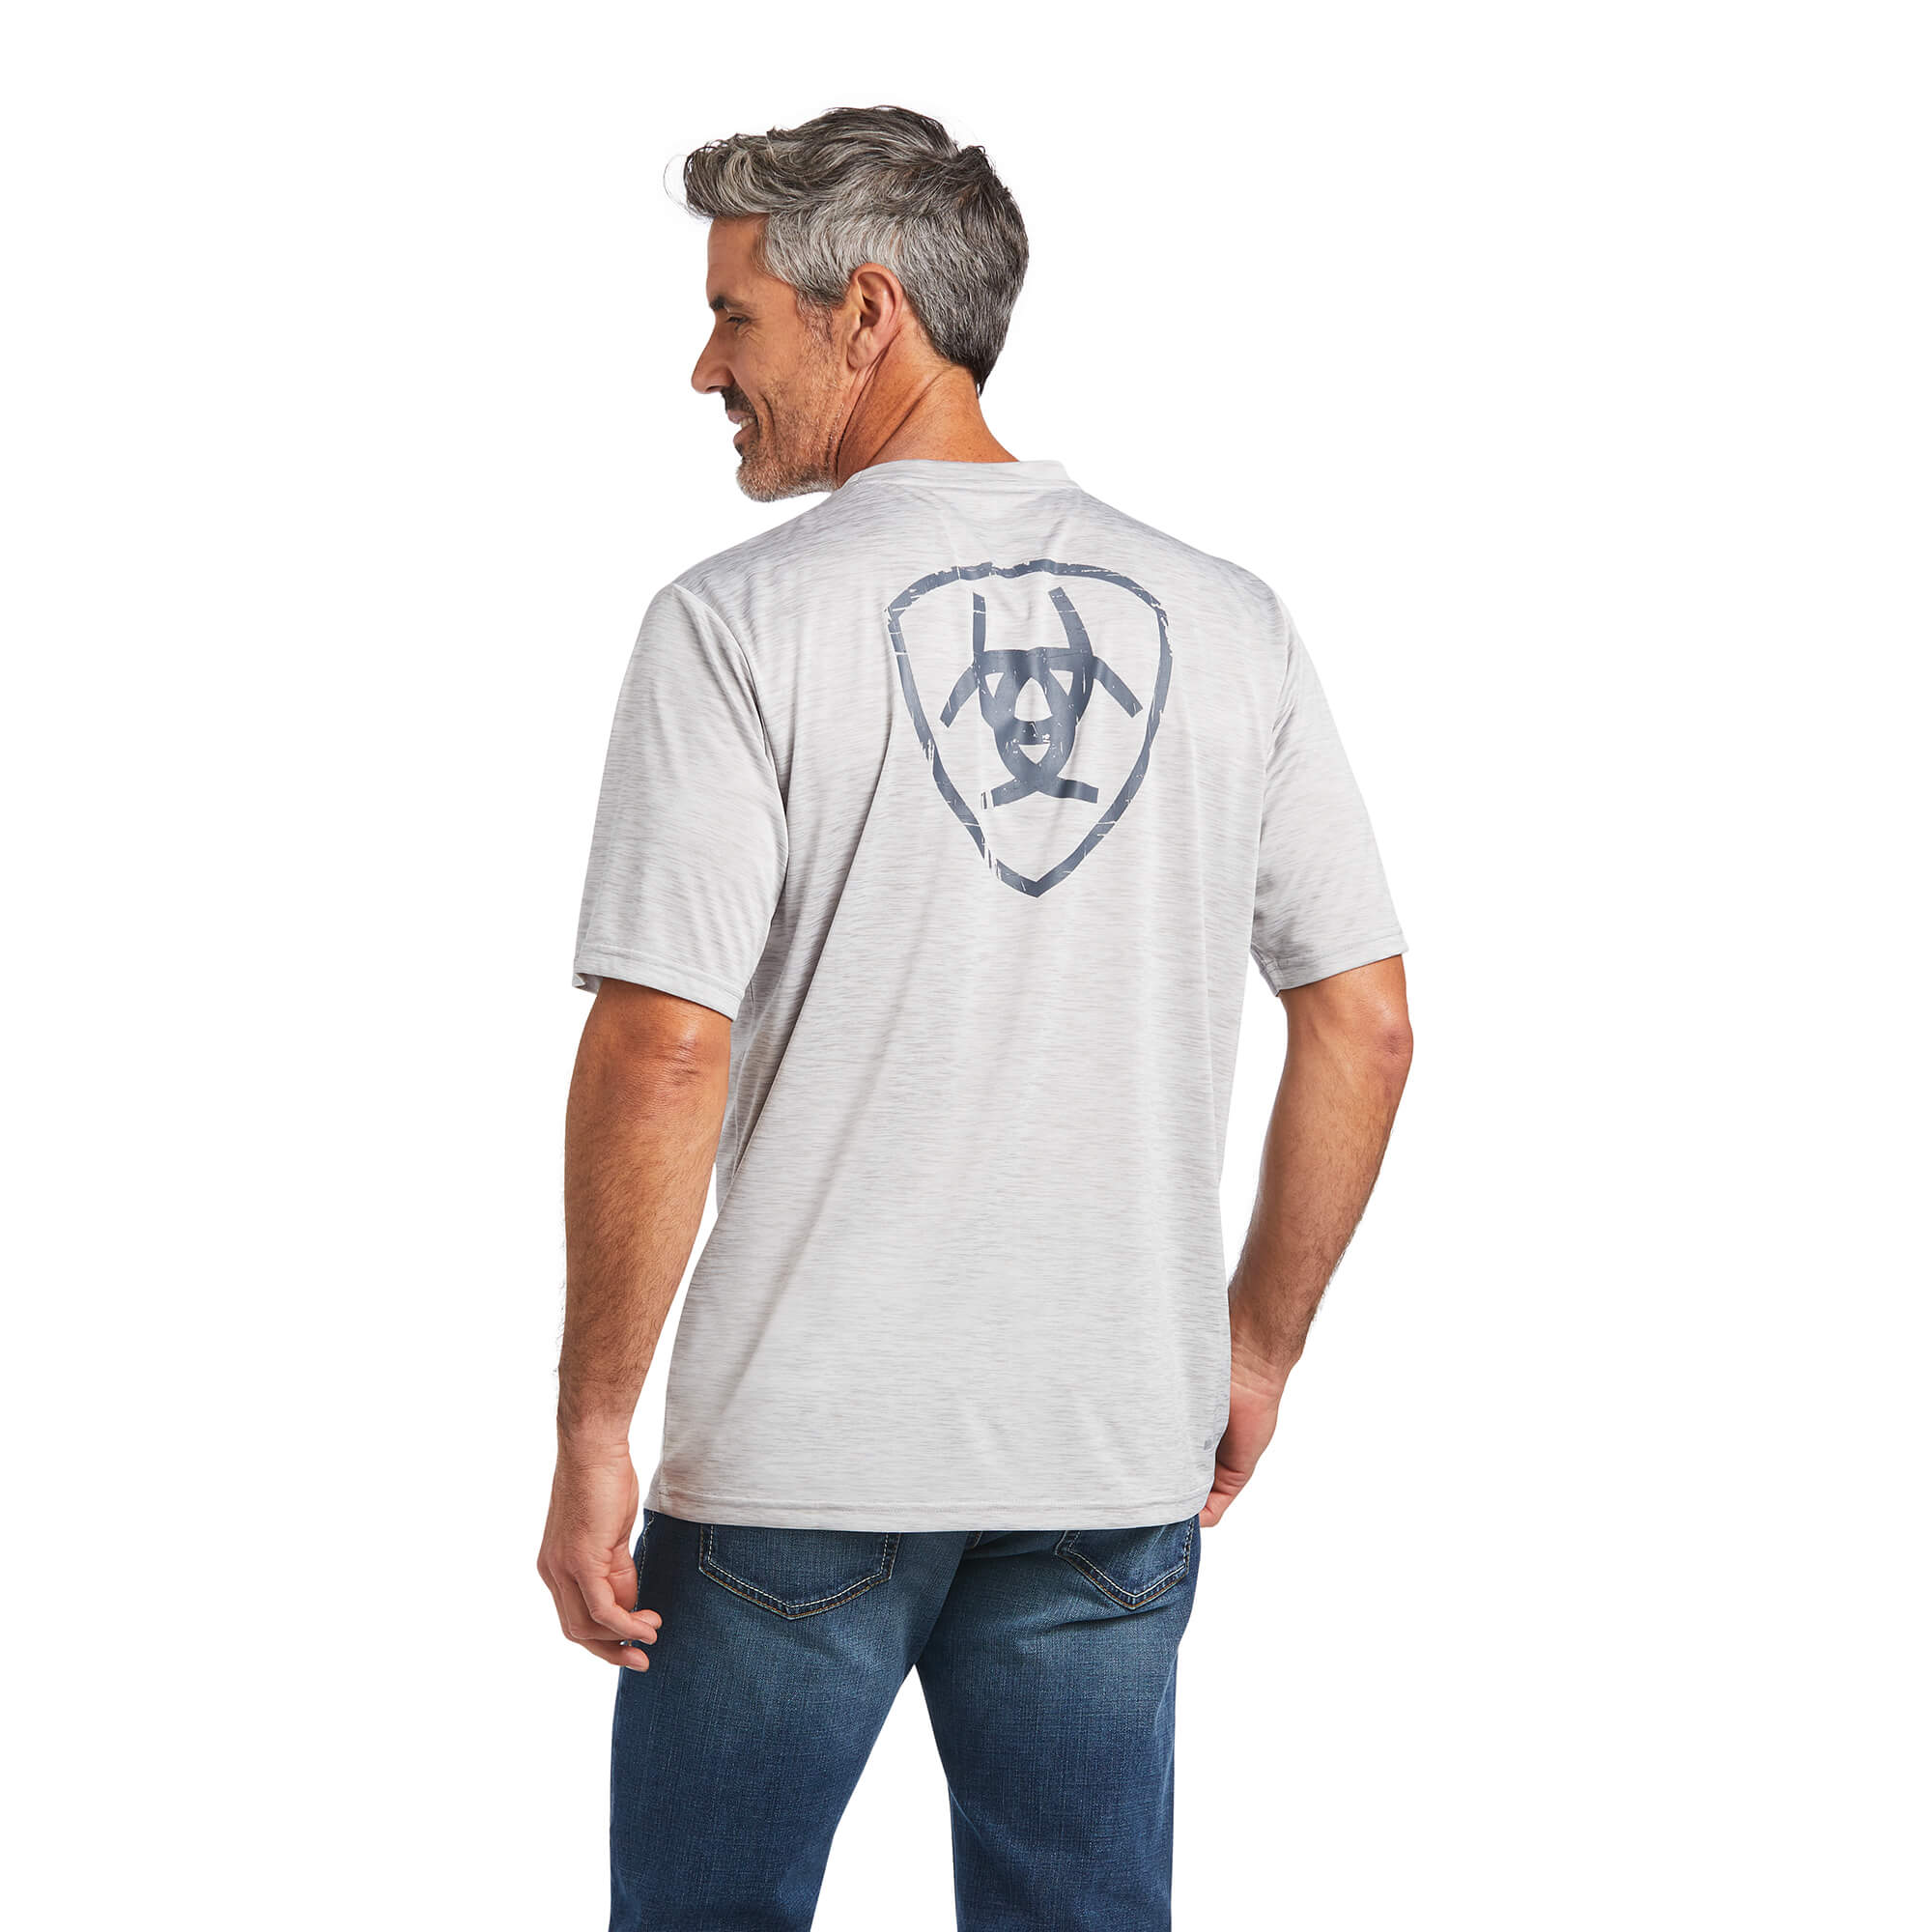 Ariat Charger Shield T-Shirt